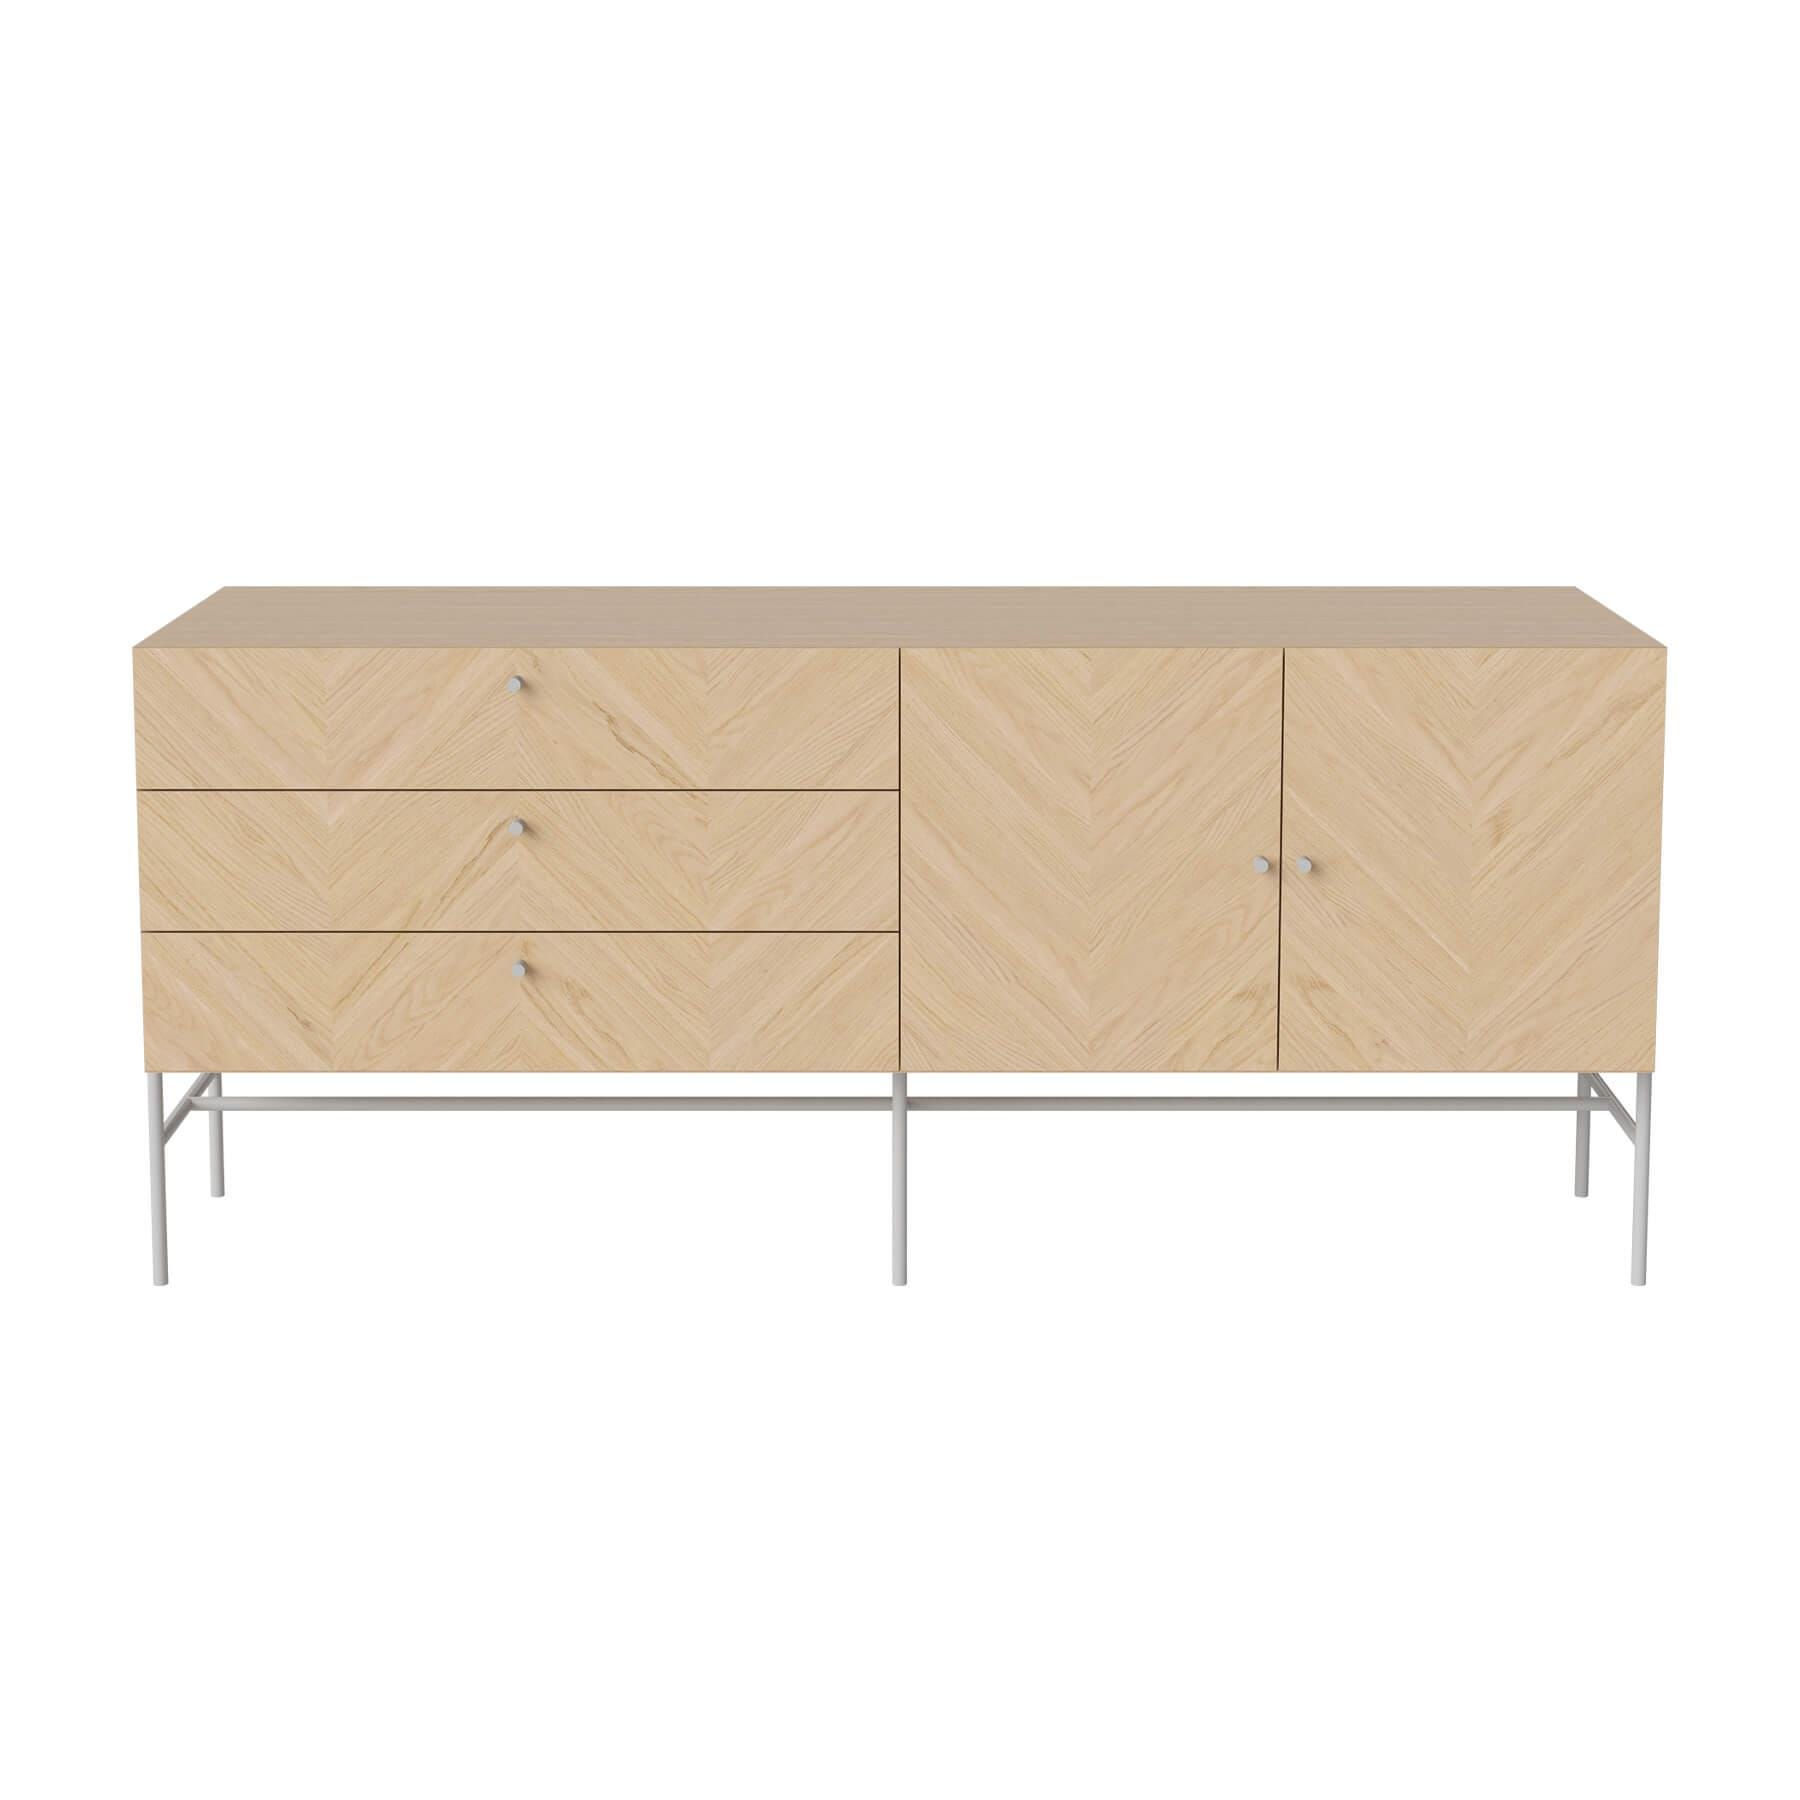 Bolia Luxe Sideboard White Pigmented Oak Grey Door Knobs Light Wood Designer Furniture From Holloways Of Ludlow